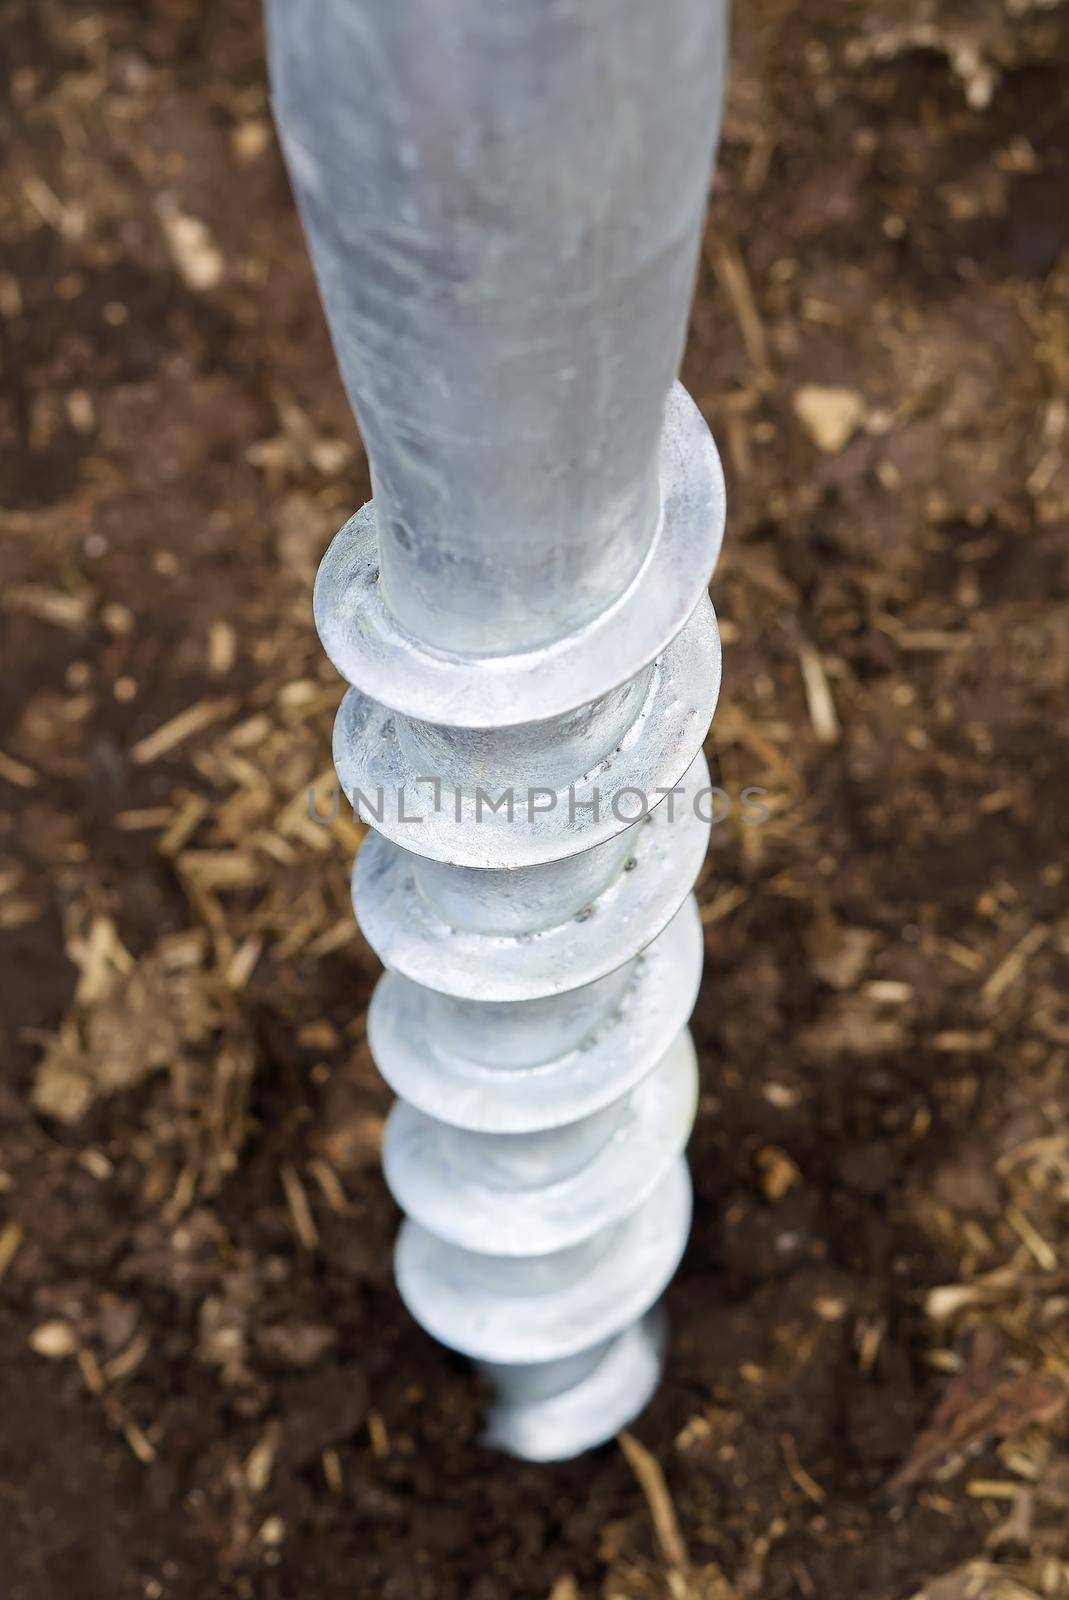 galvanized screw piles for the foundation. Lightweight and fast foundation made of screw piles is well suited for solar panels, terraces and greenhouses by PhotoTime